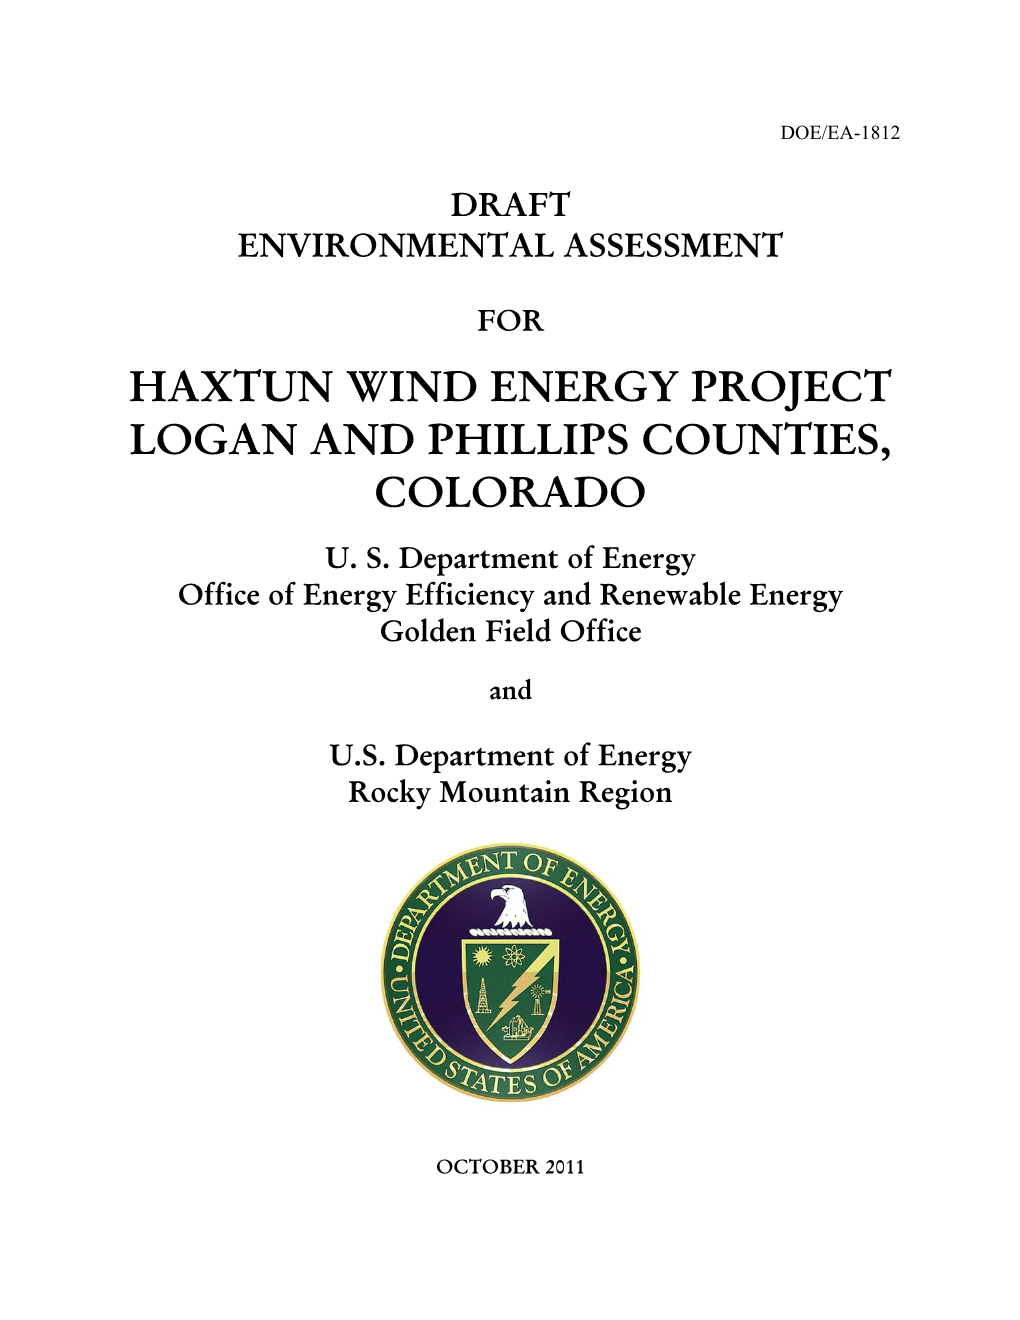 Haxtun Wind Energy Project Logan and Phillips Counties, Colorado